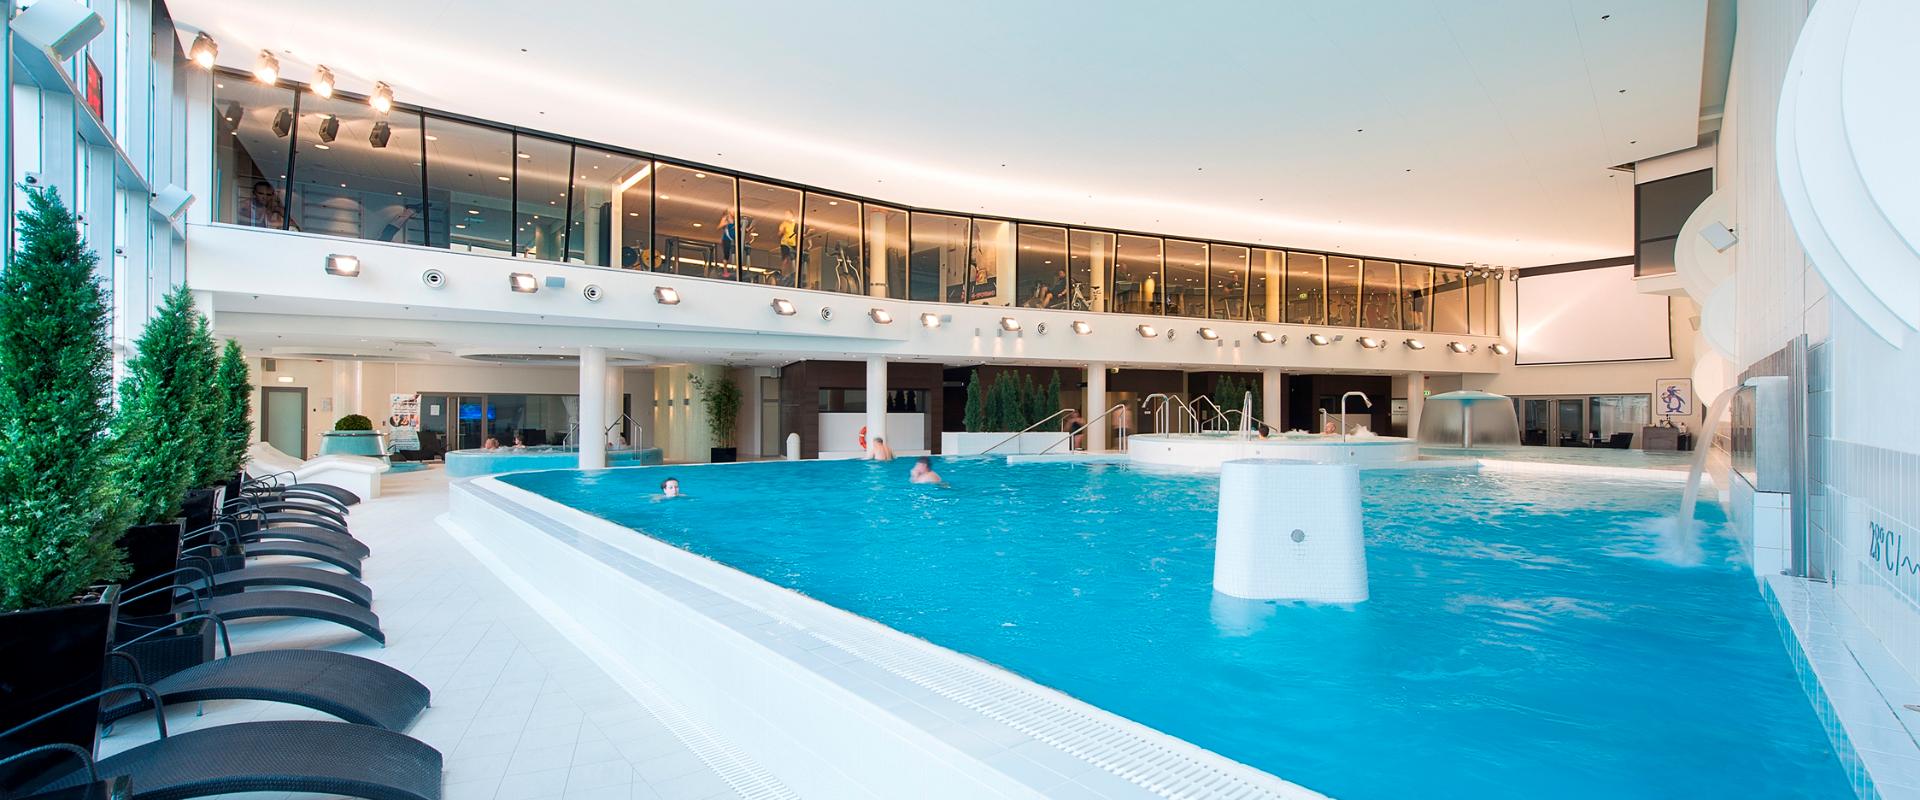 Meriton Wellness Spa is located on the first floor of the Park Inn by Radisson Meriton Conference & Spa Hotel Tallinn. The services of the Spa include